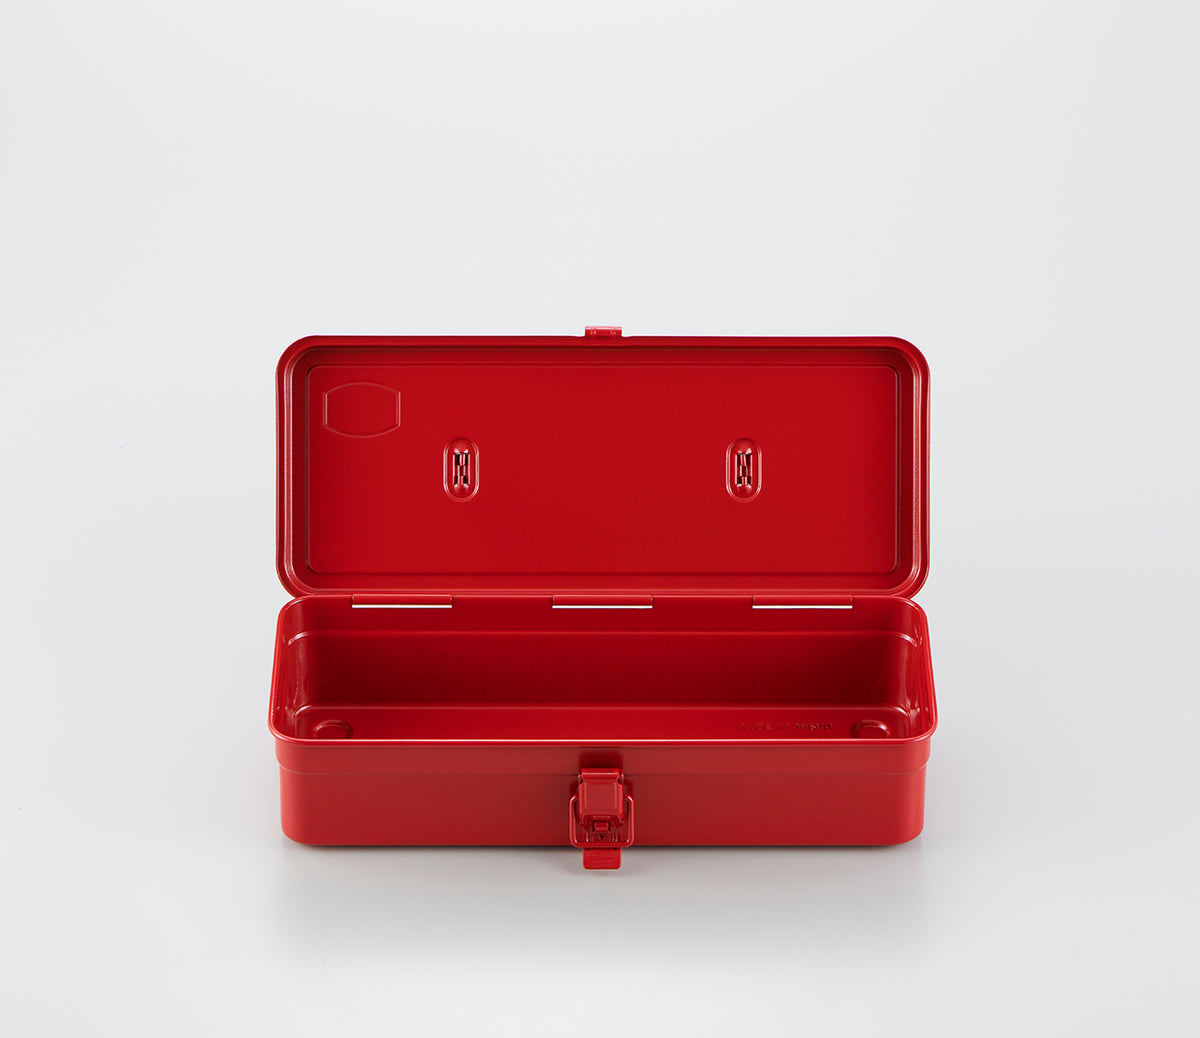 Steel Toolbox with Top Handle T-320 - Red - Kiki